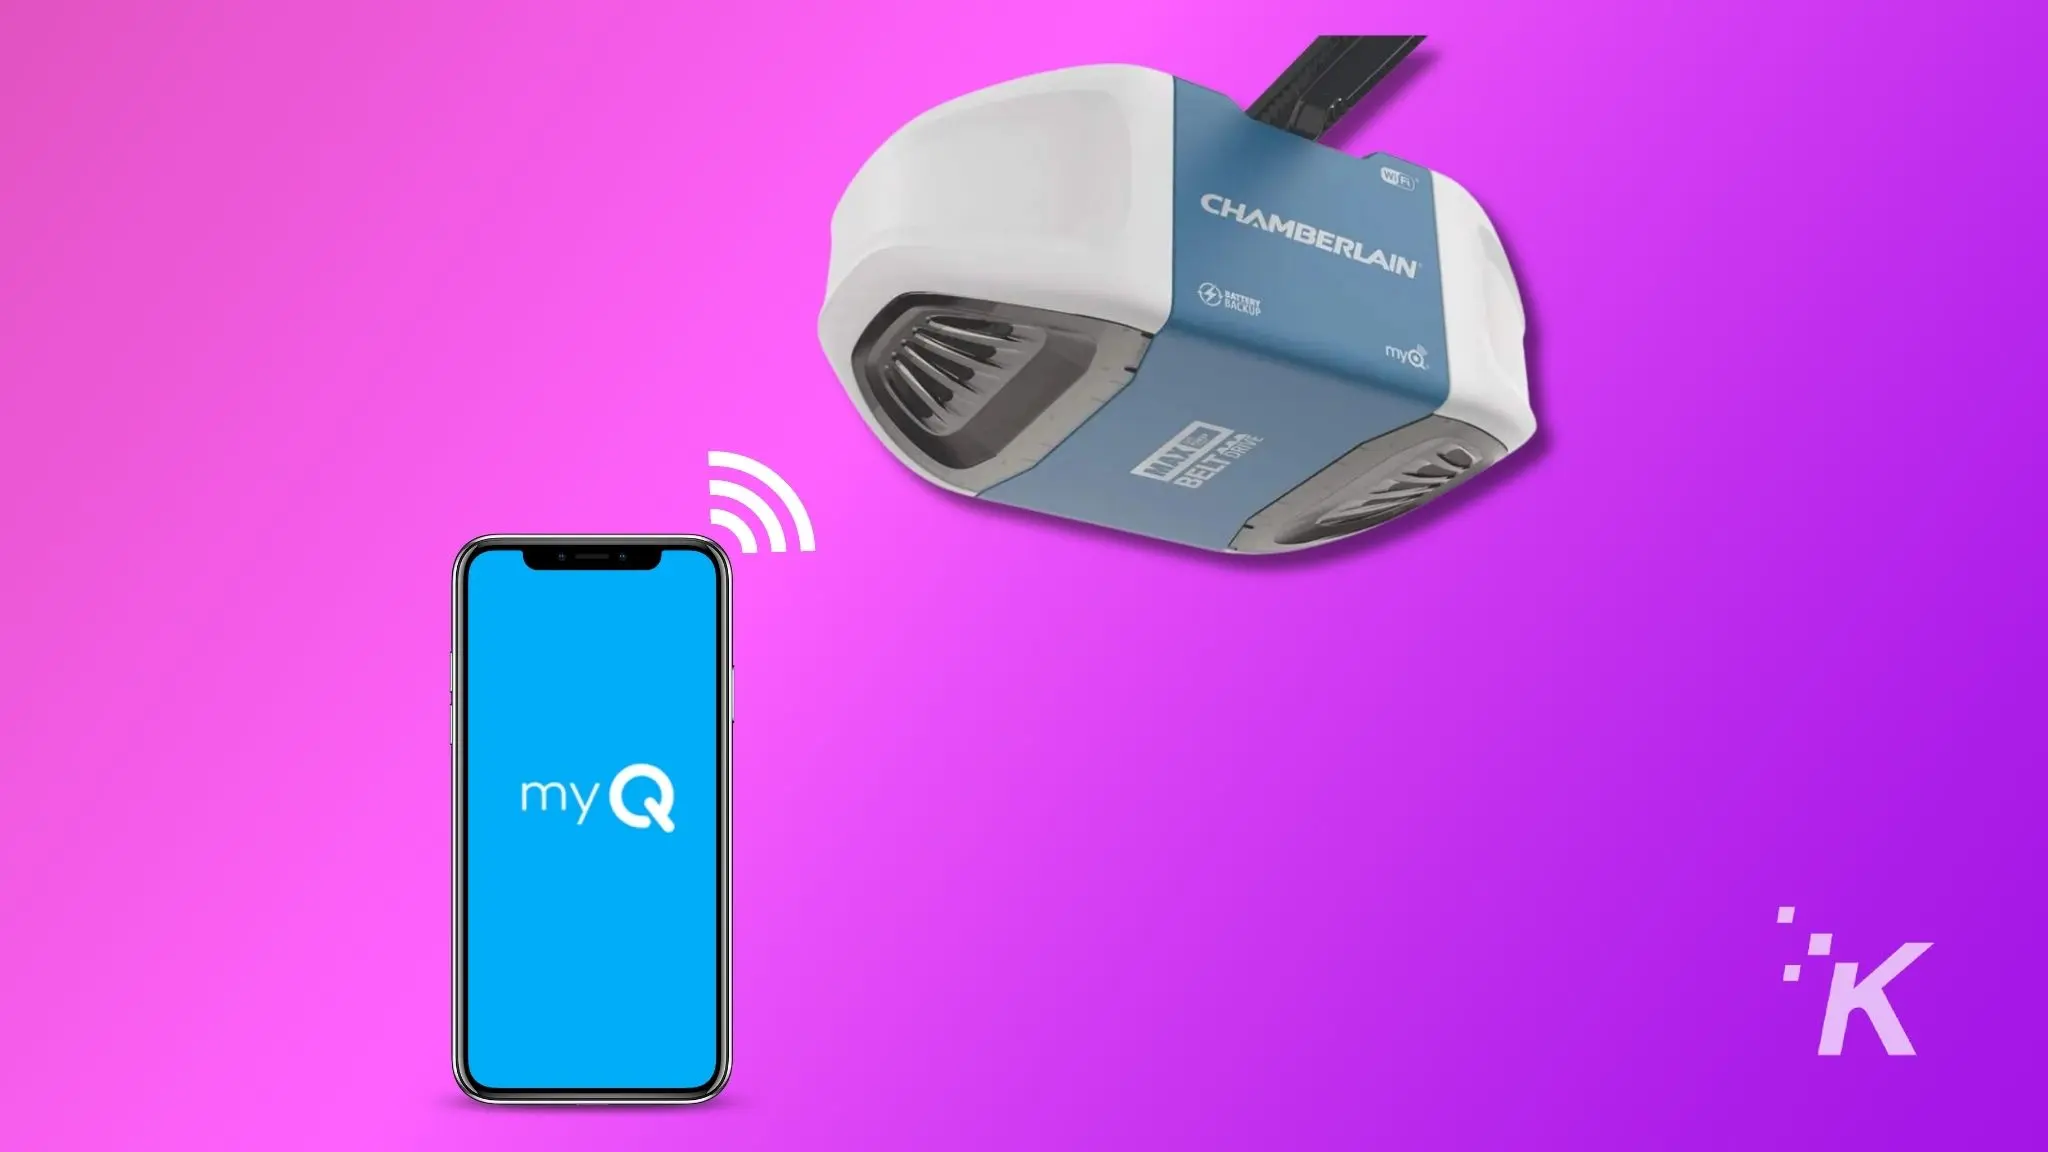 A person is using a Chamberlain MyQ to access a WiFi network.